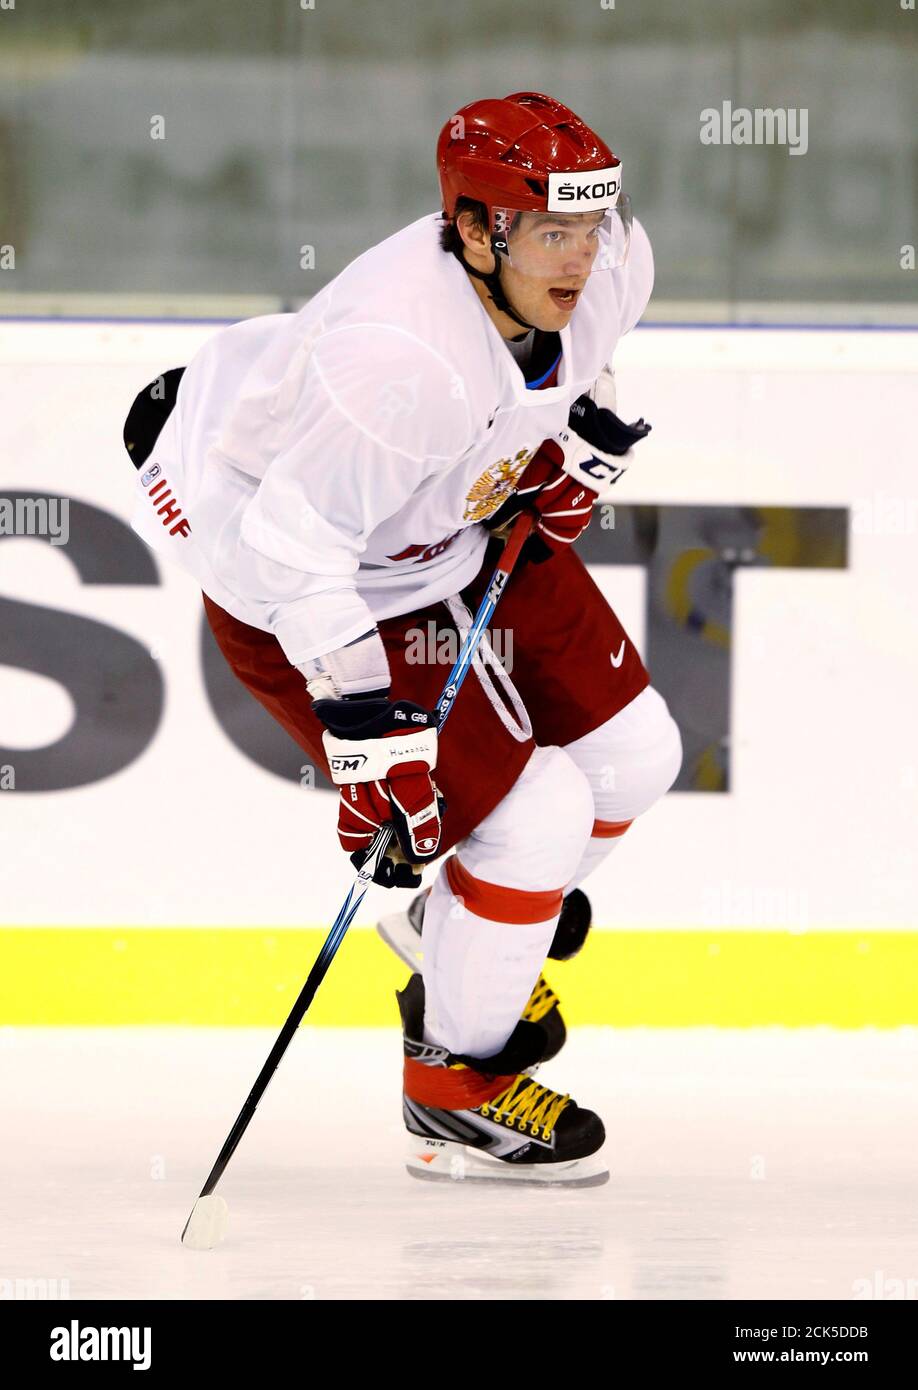 Russian hockey player for the Washington Capitals, Alexander Ovechkin,  skates during a training session in Bratislava May 7, 2011. Ovechkin has  arrived from Washington on Saturday to join the Russian national team